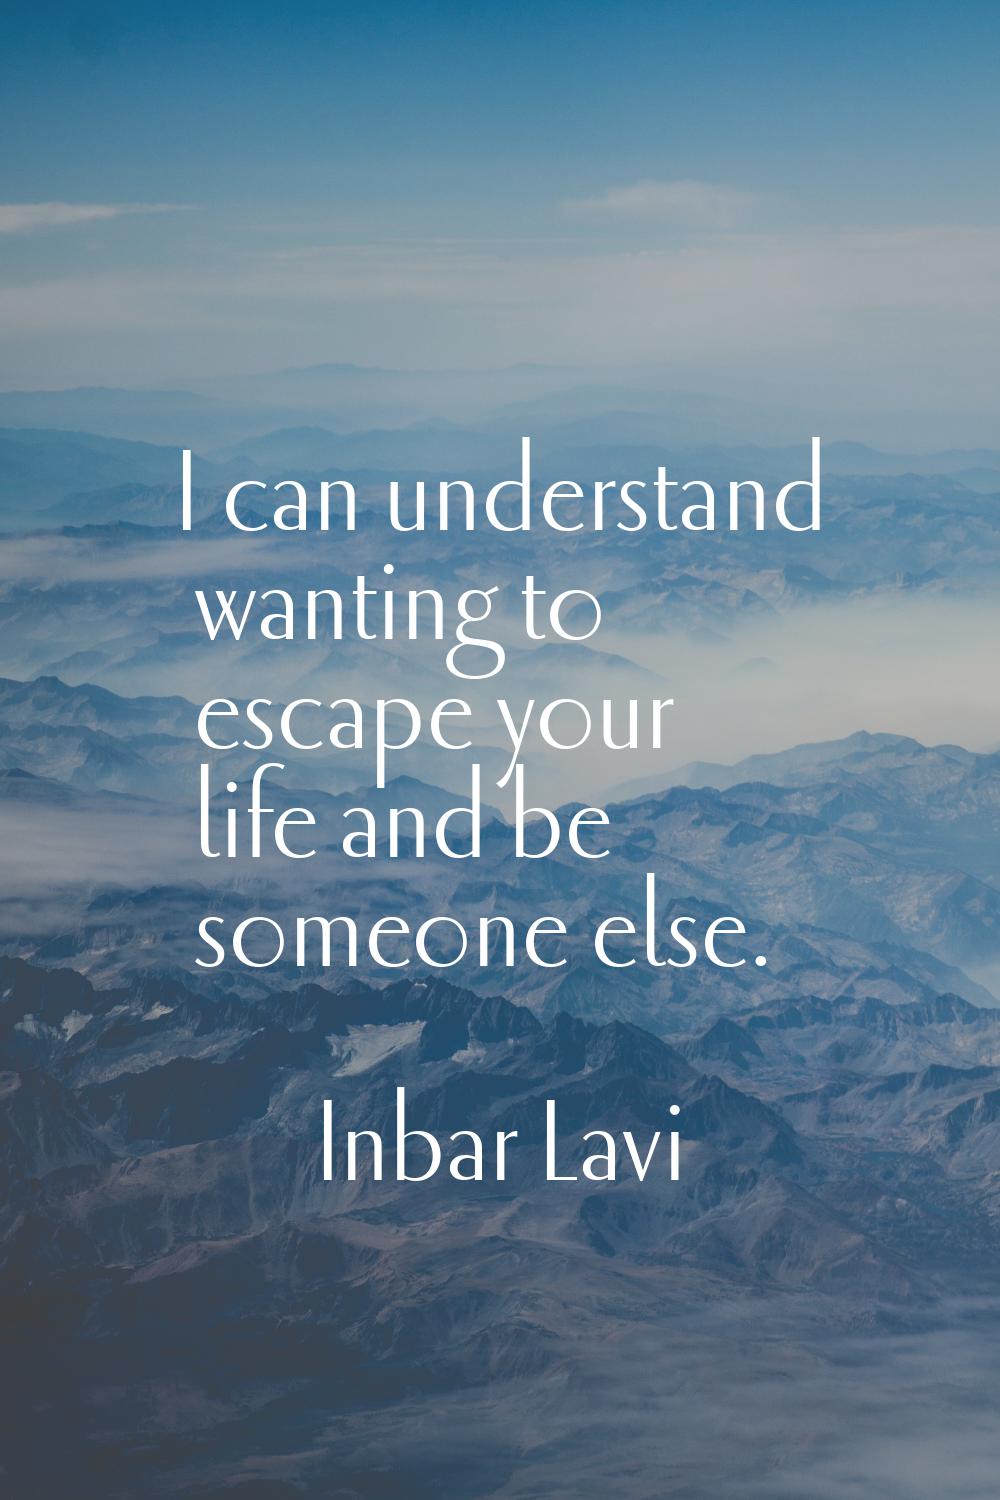 I can understand wanting to escape your life and be someone else.